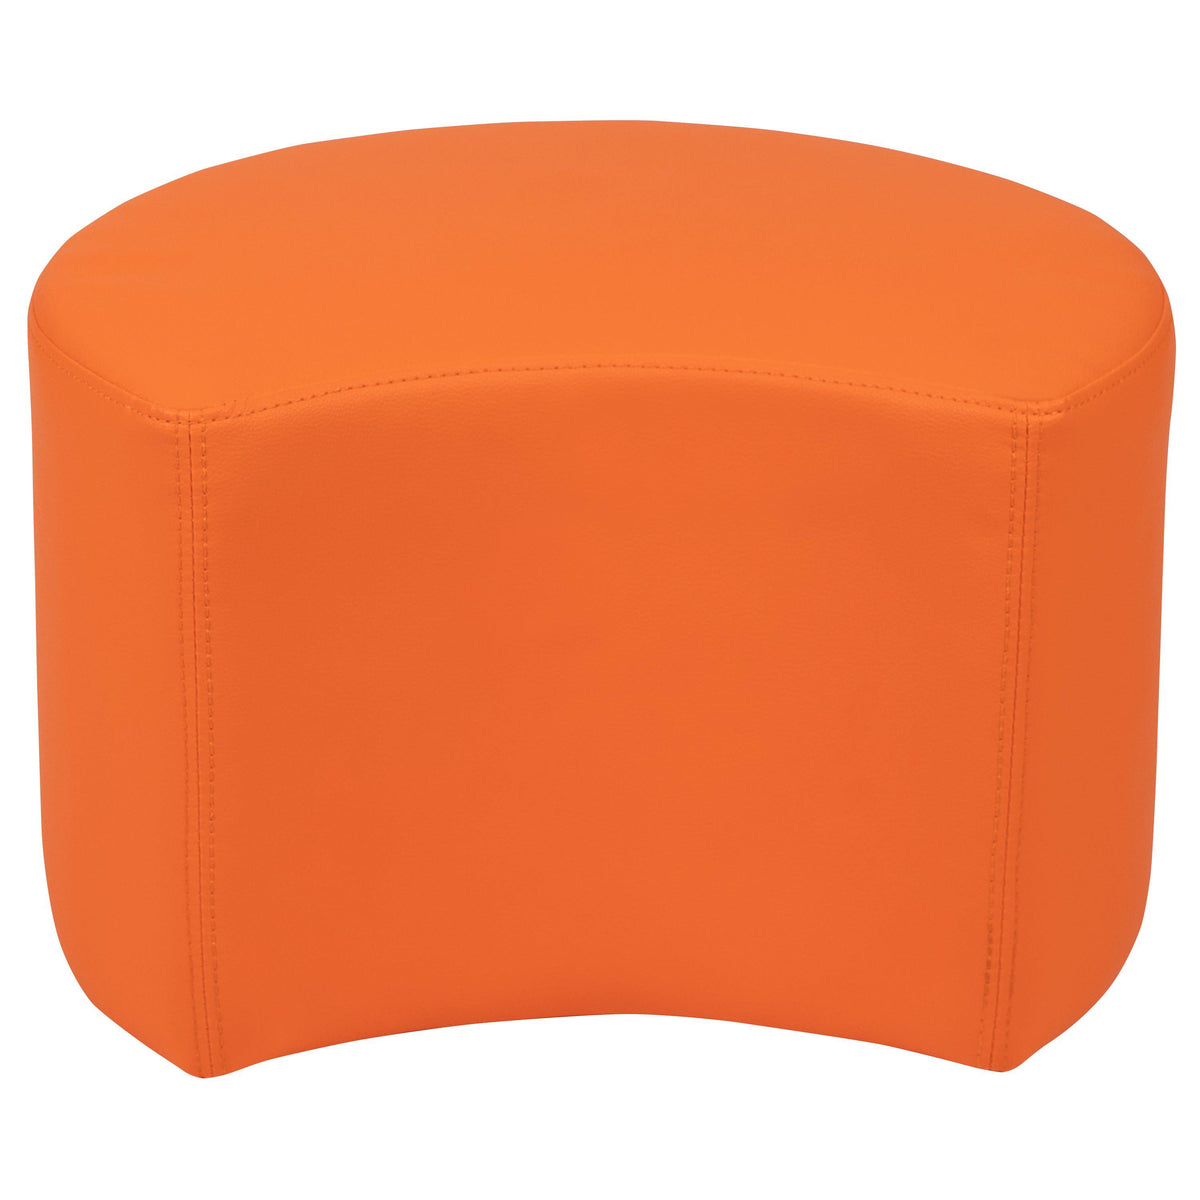 Orange |#| Soft Seating Flexible Moon for Classrooms - 12inch Seat Height (Orange)